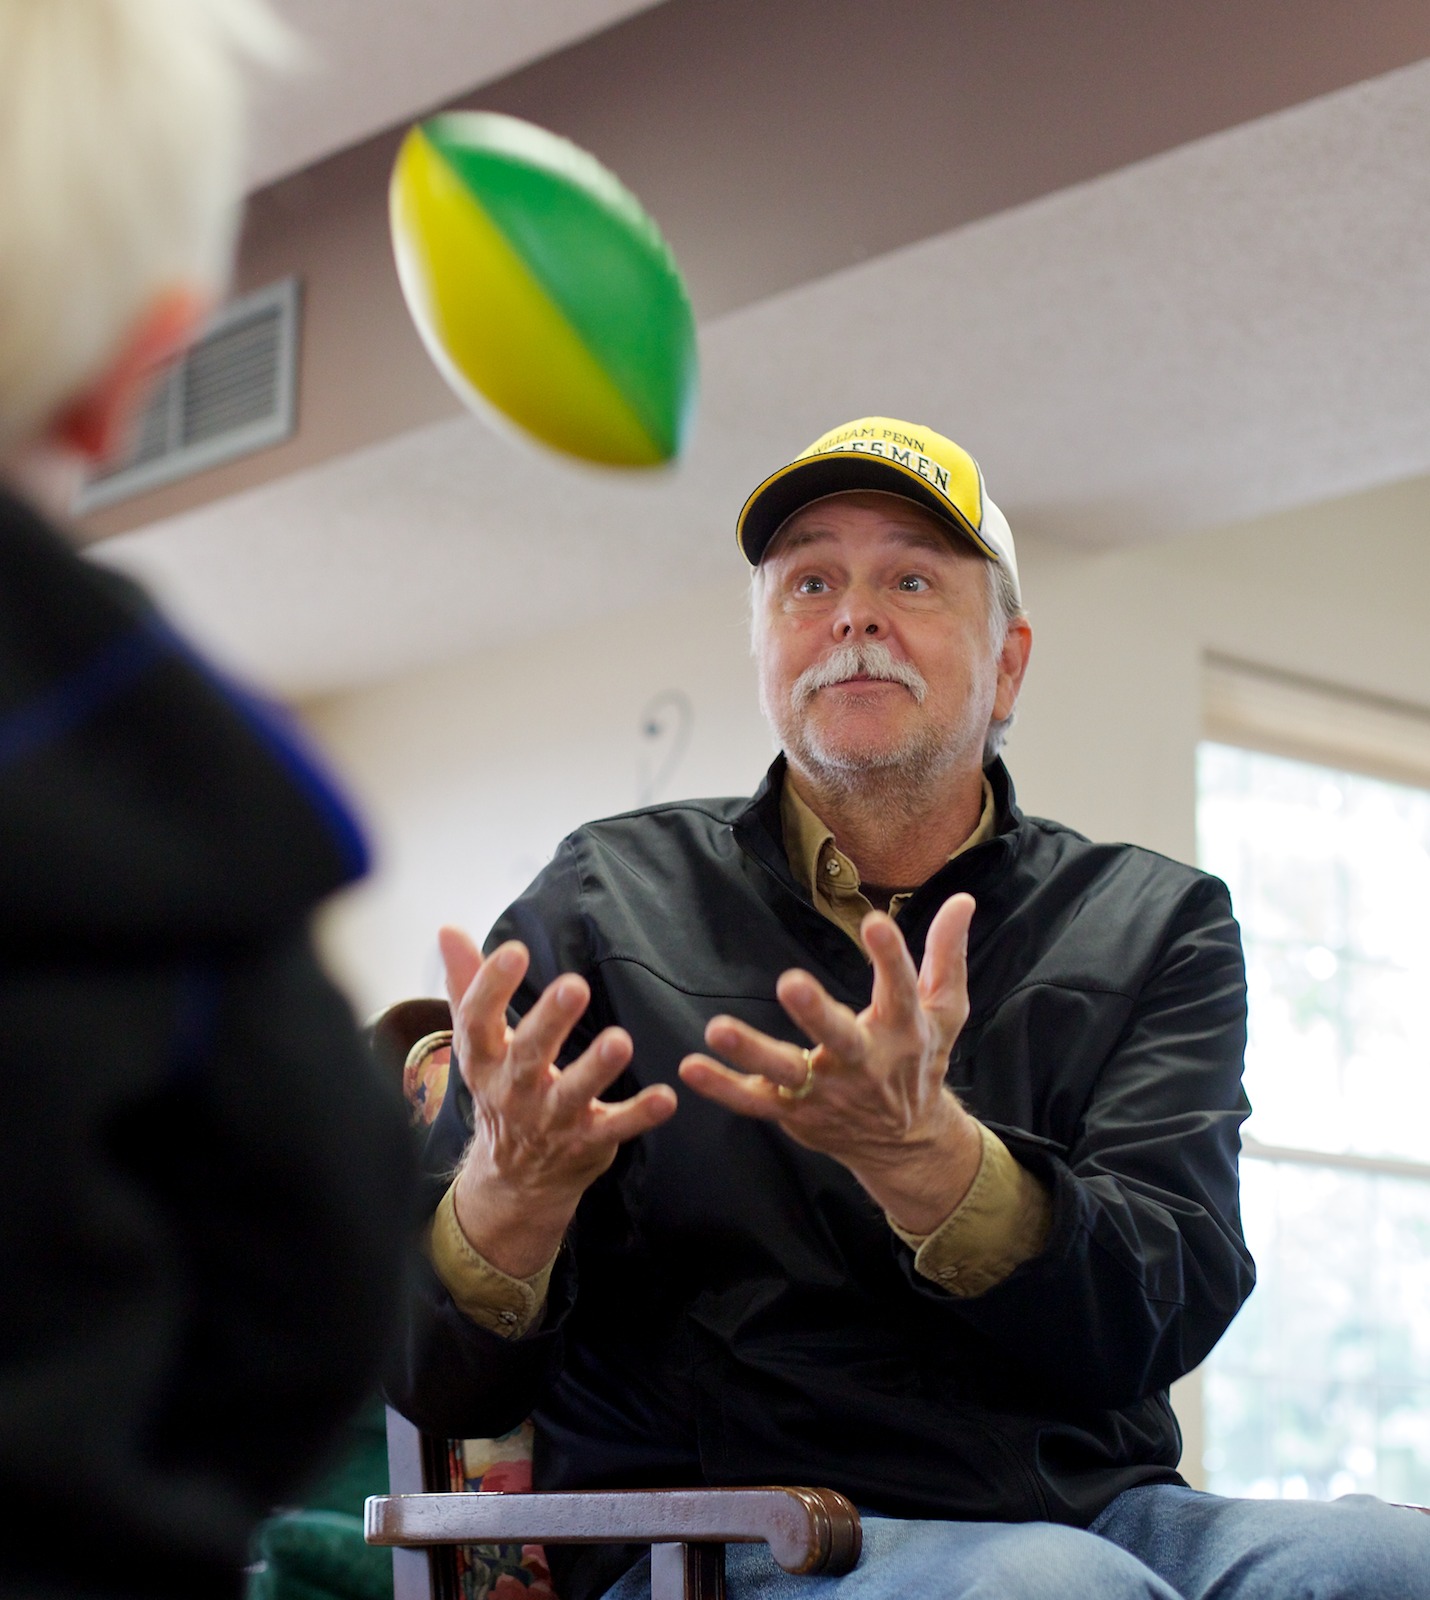 Adult day participant playing catch